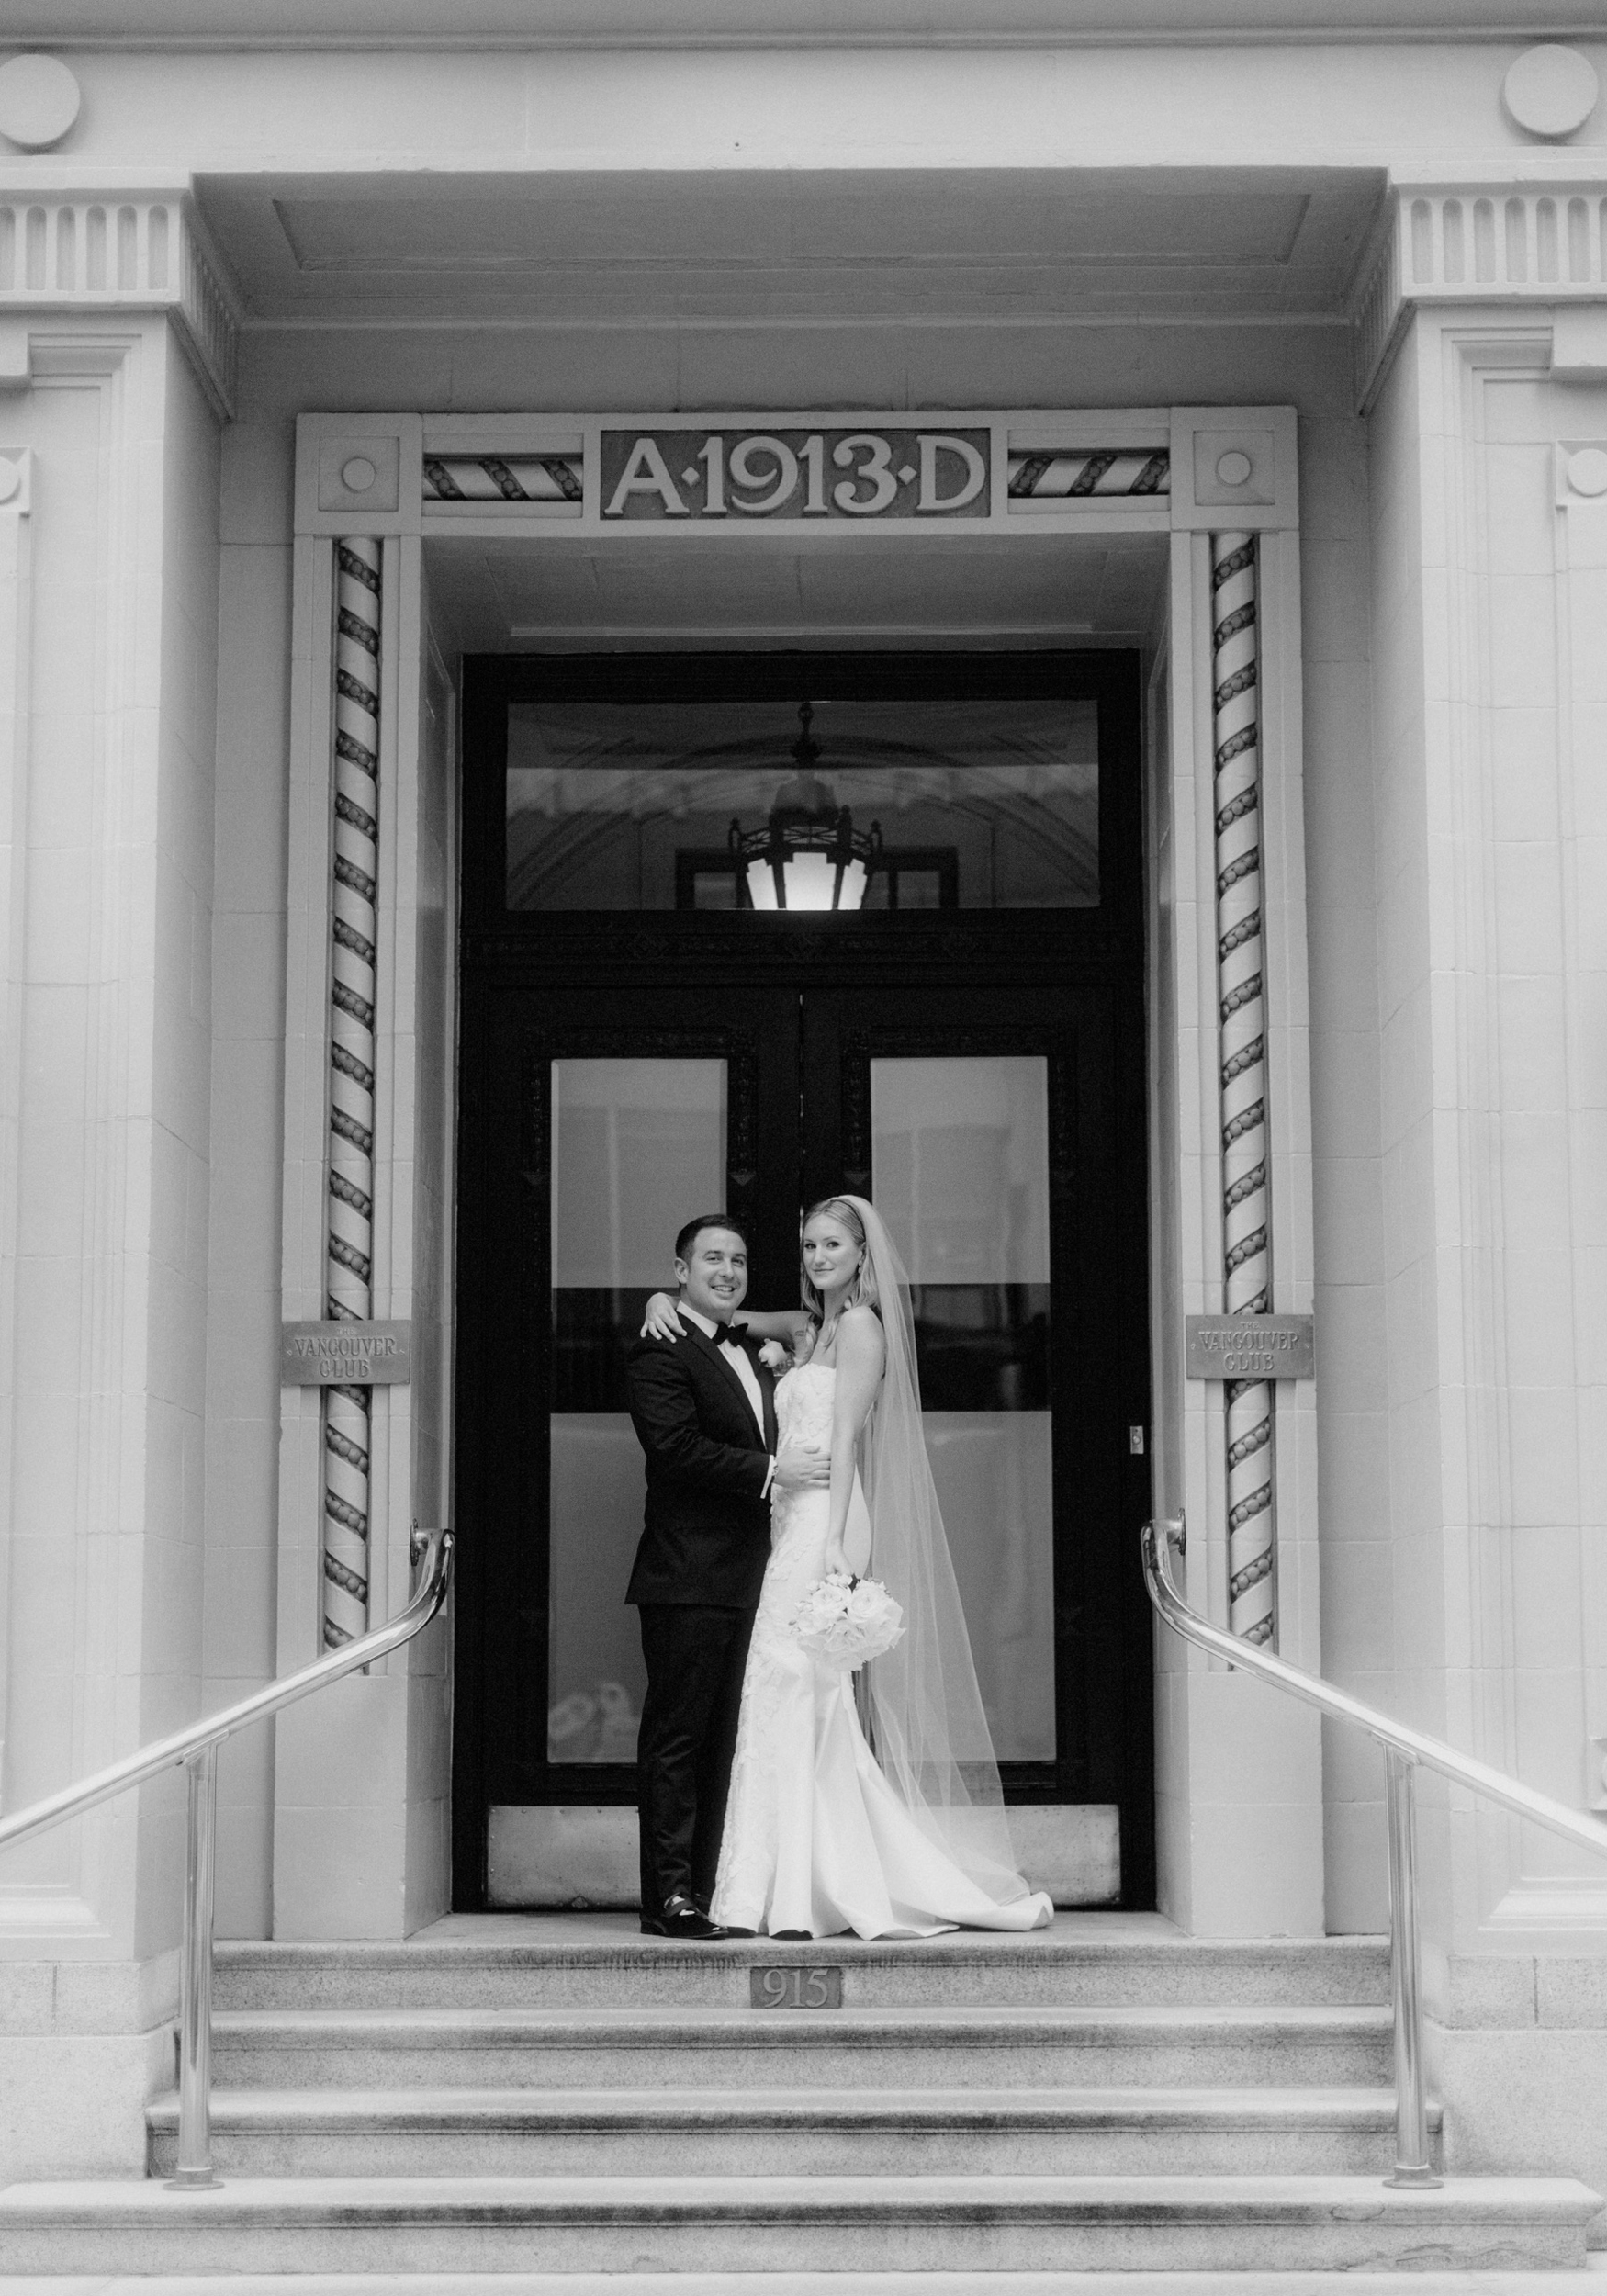 Timless black tie wedding potraits on historic stone steps infront of The Vancouver Club with A1913D inscribed above them